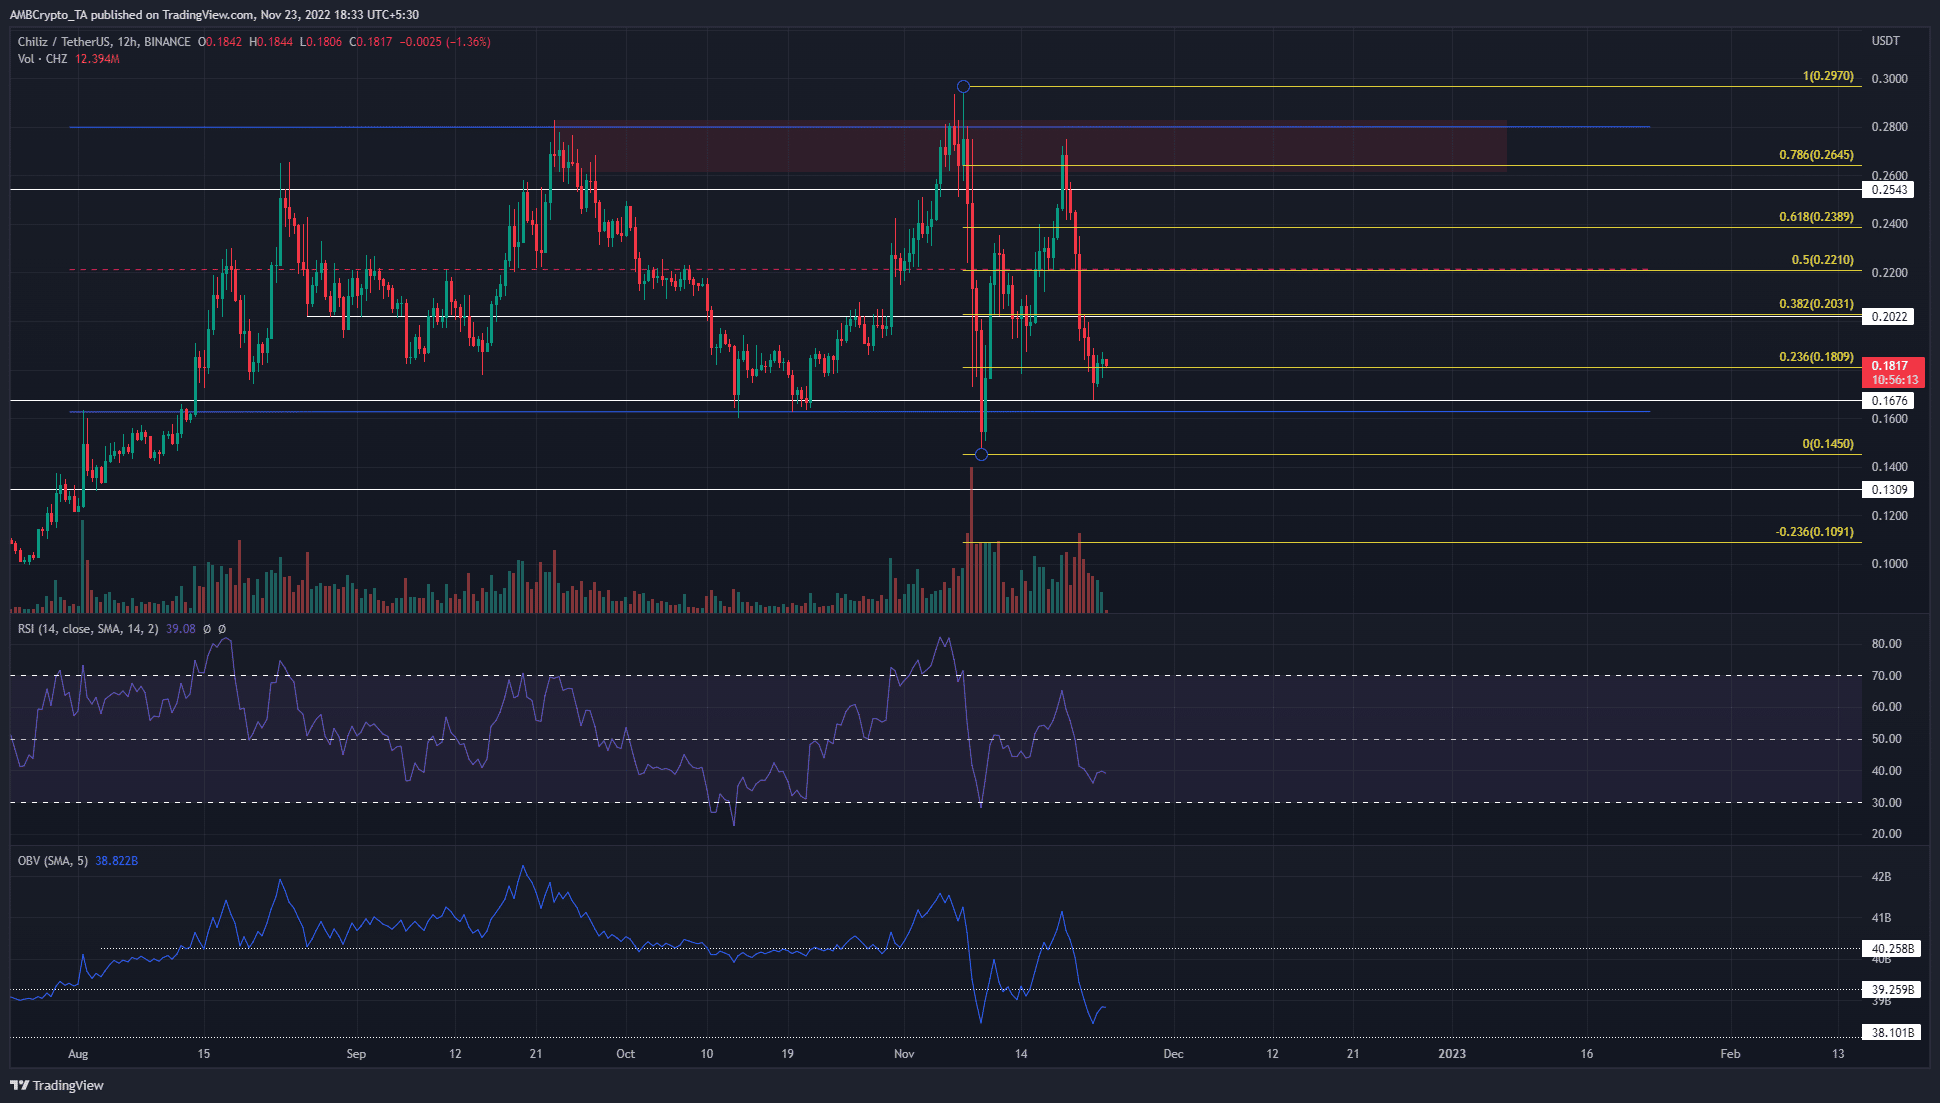 Chiliz sees a minor rally but how high can the CHZ bulls push the price